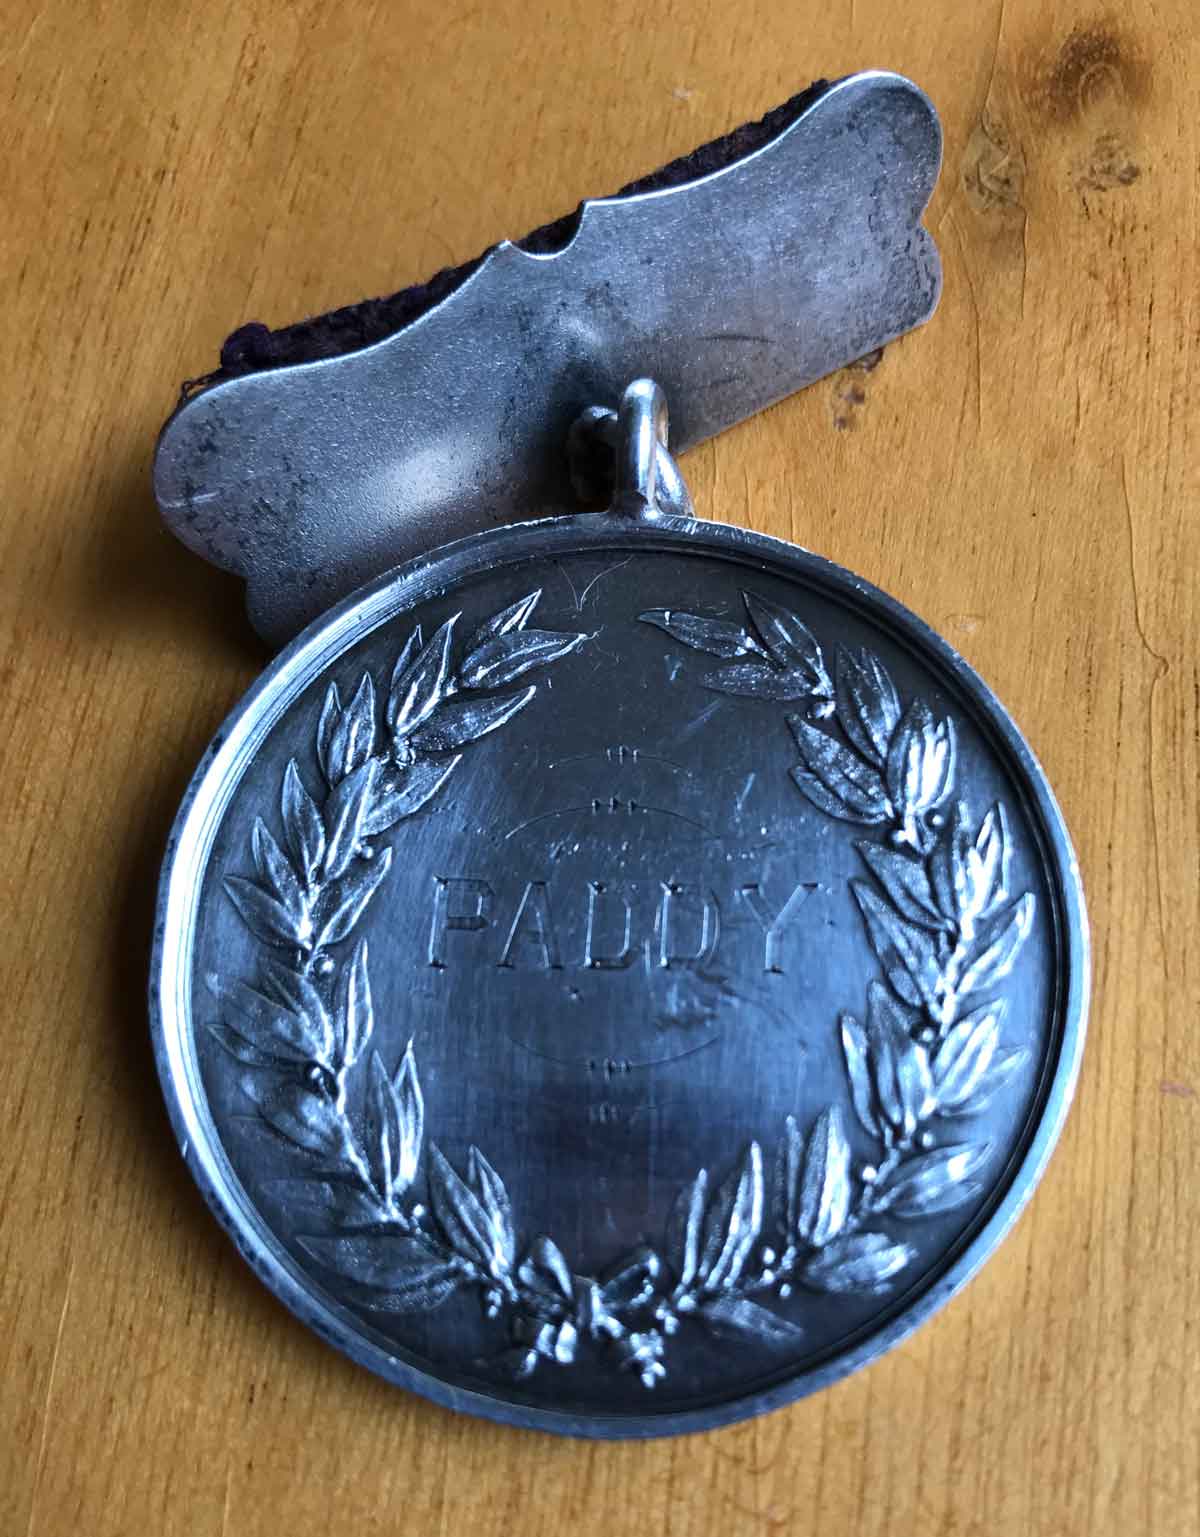 A medal with the name Paddy on it